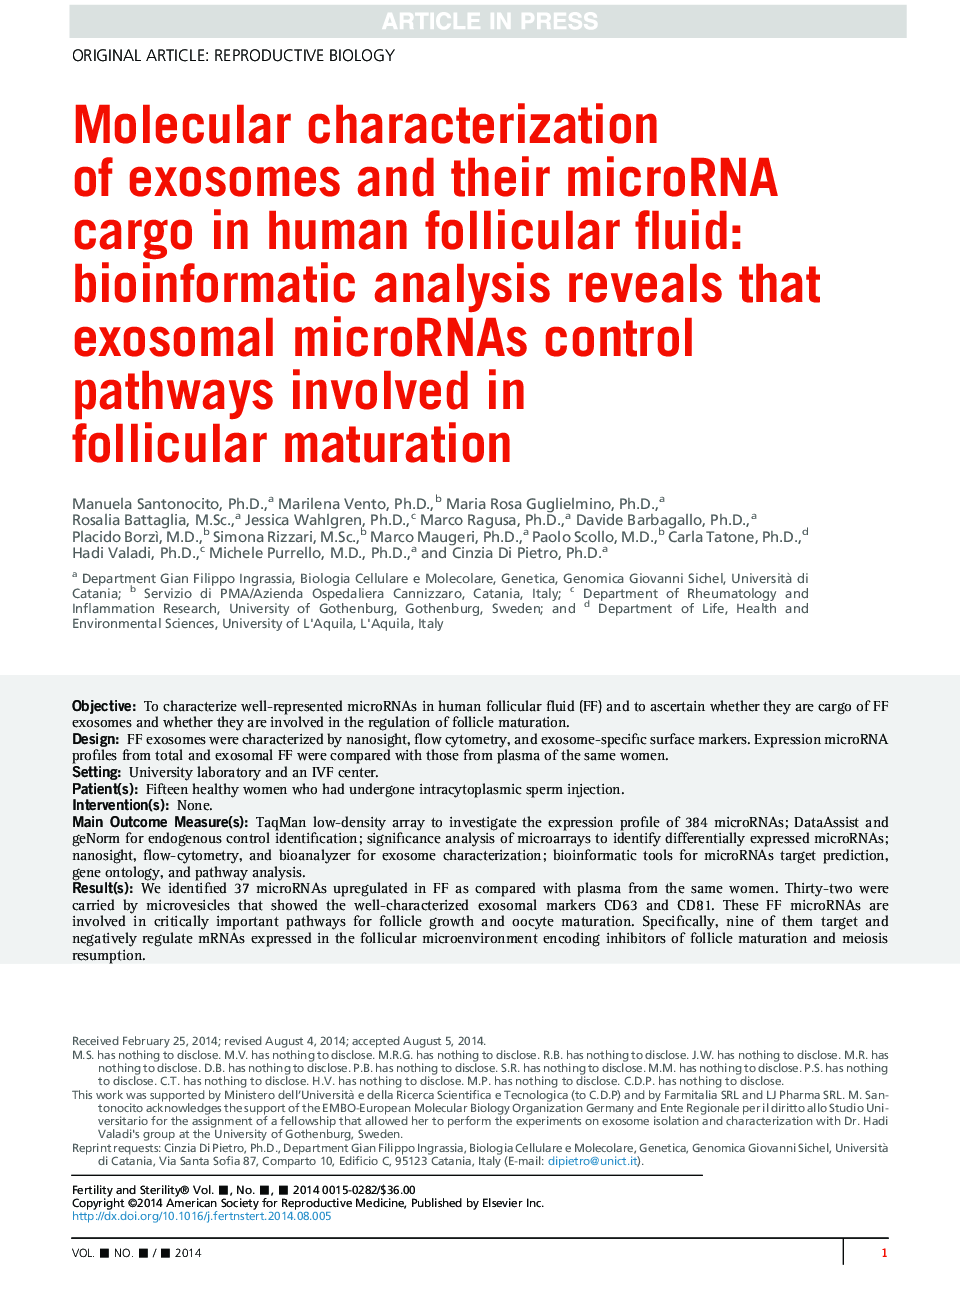 Molecular characterization ofÂ exosomes and their microRNA cargo in human follicular fluid: bioinformatic analysis reveals that exosomal microRNAs control pathways involved in follicular maturation